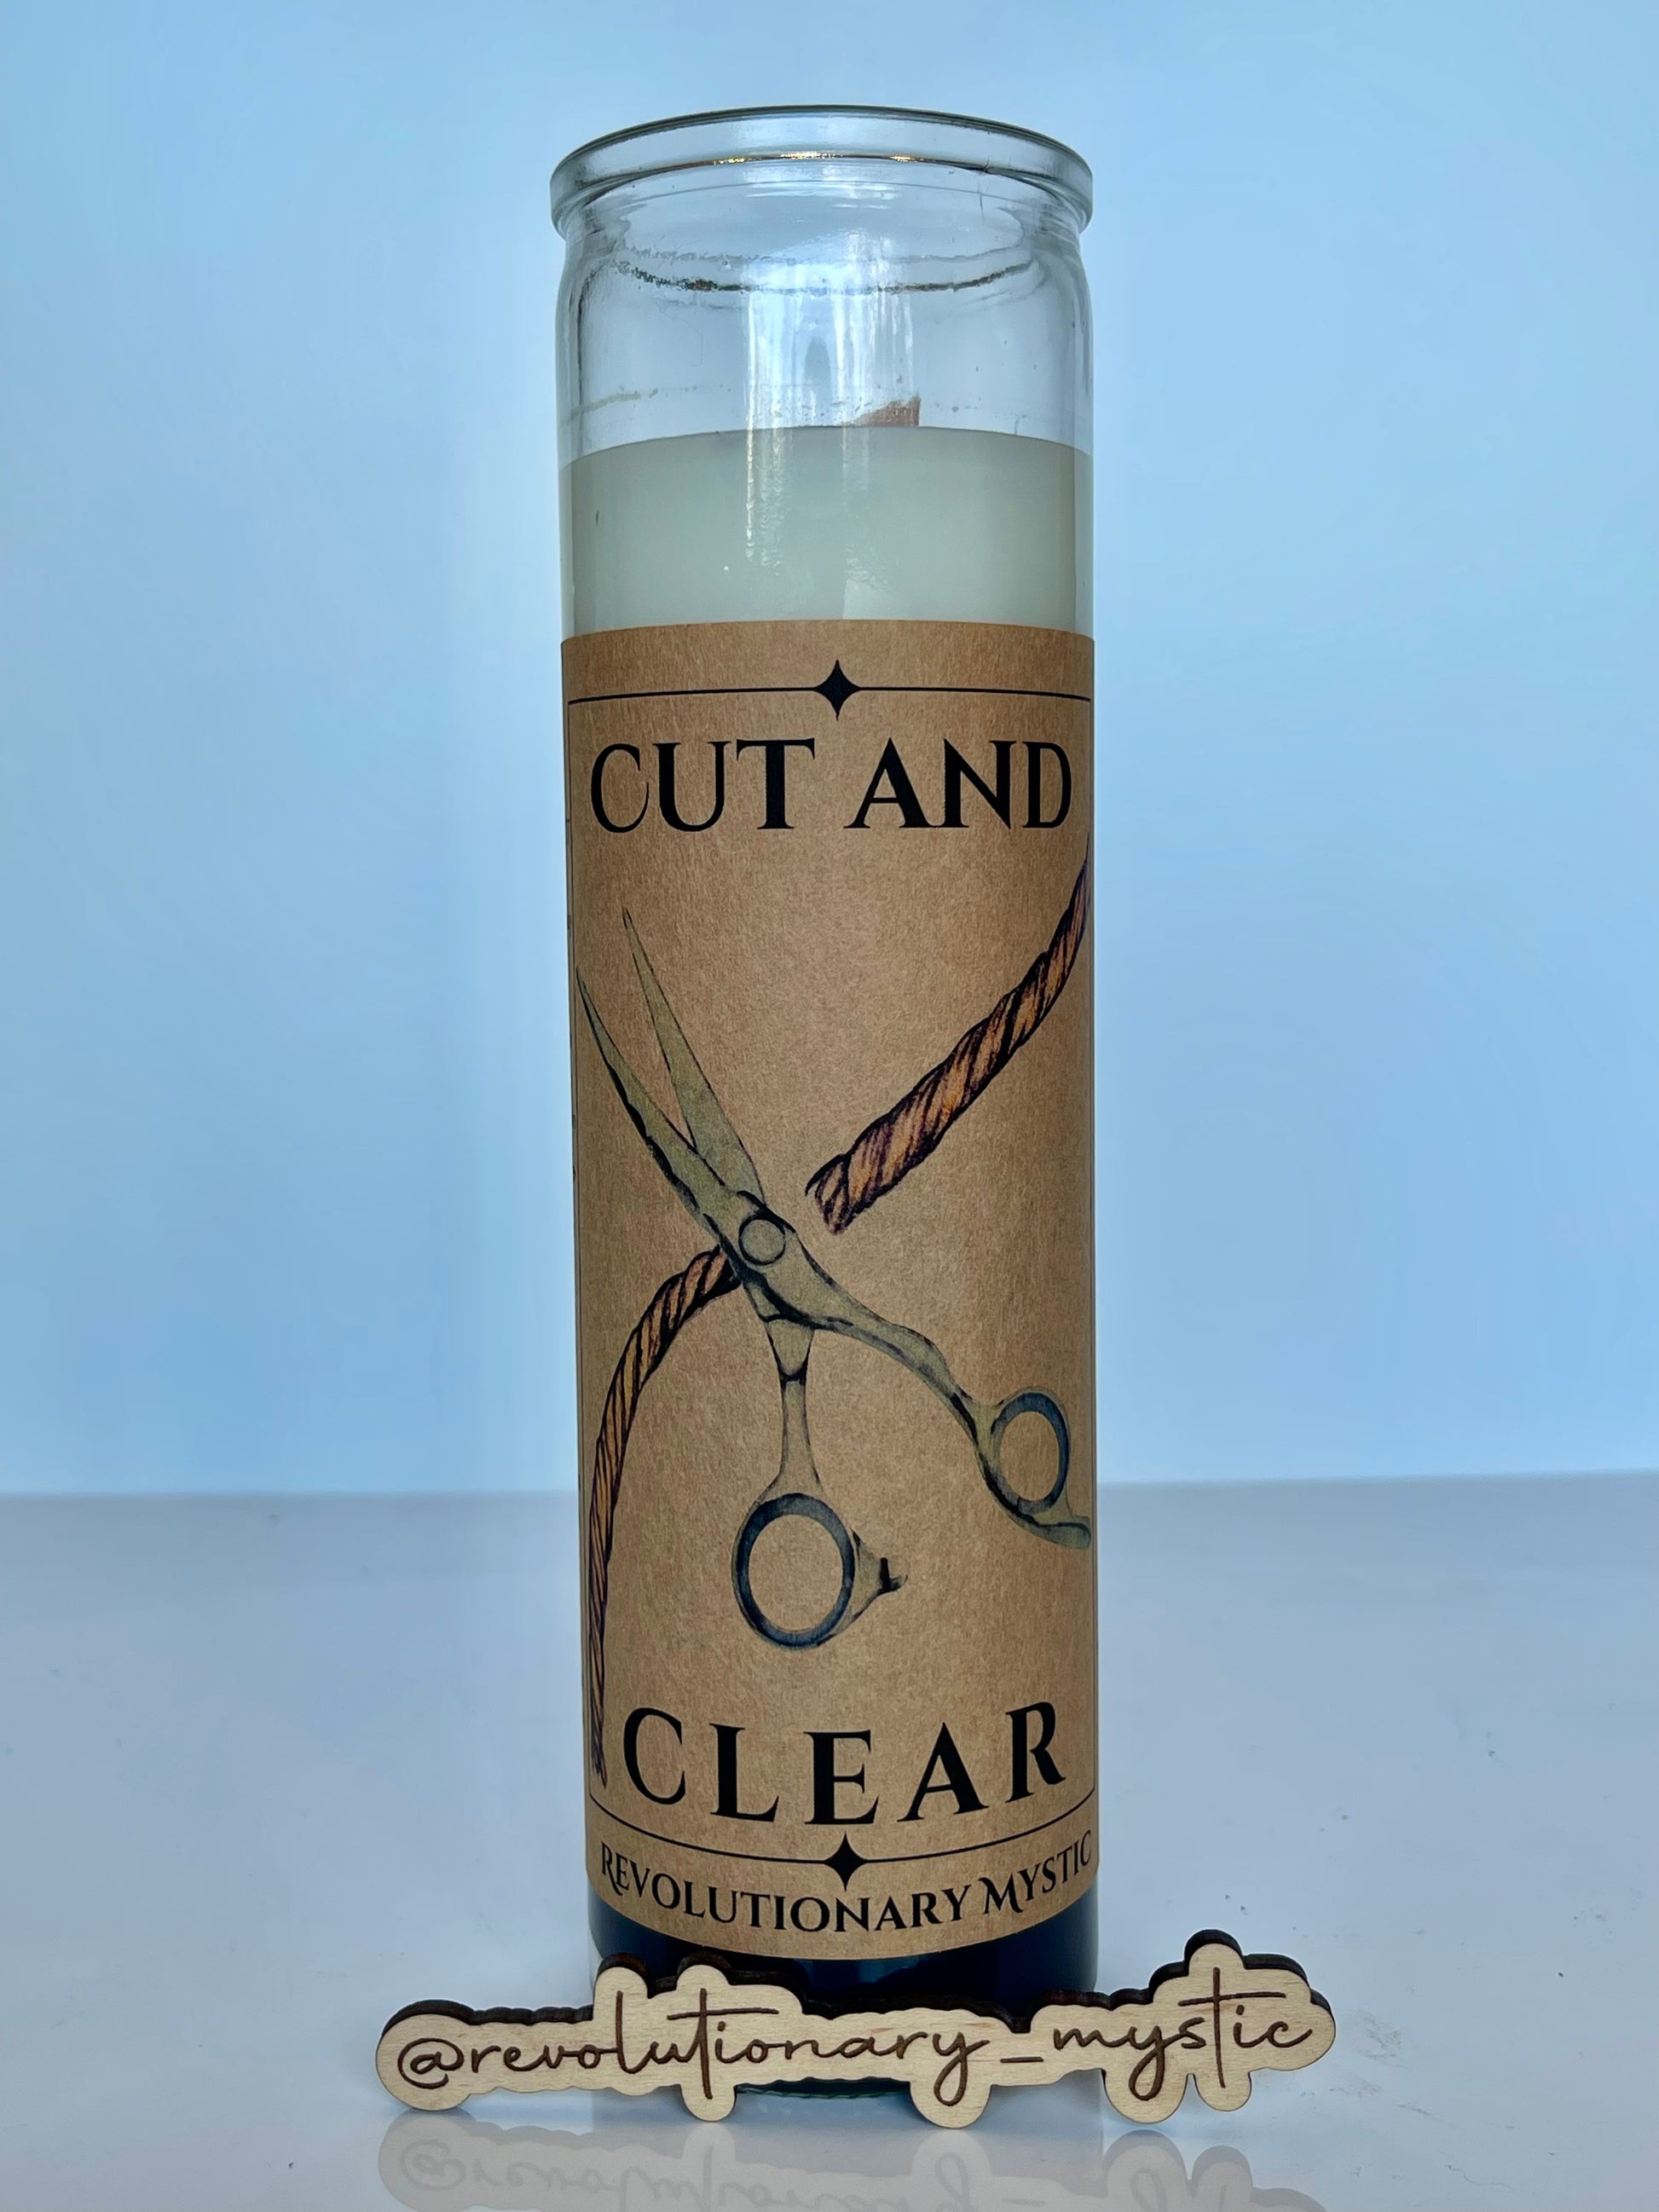 Cut & Clear Candle - Revolutionary Mystic